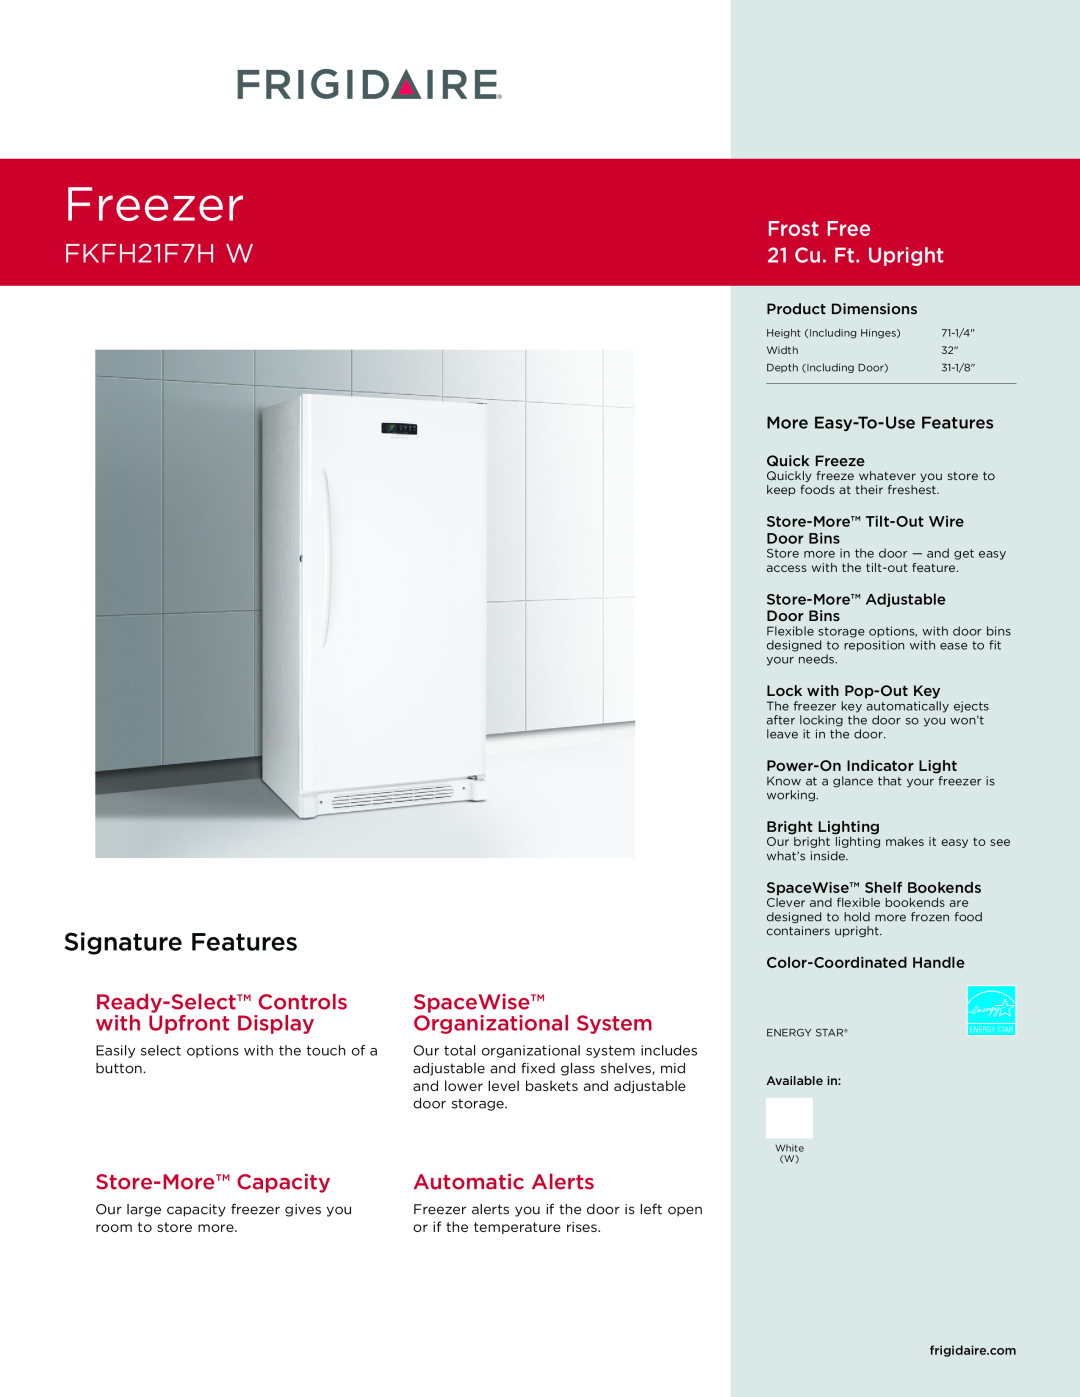 Frigidaire FKFH21F7H W dimensions Freezer, Signature Features, Frost Free 21 Cu. Ft. Upright, Store-MoreCapacity 